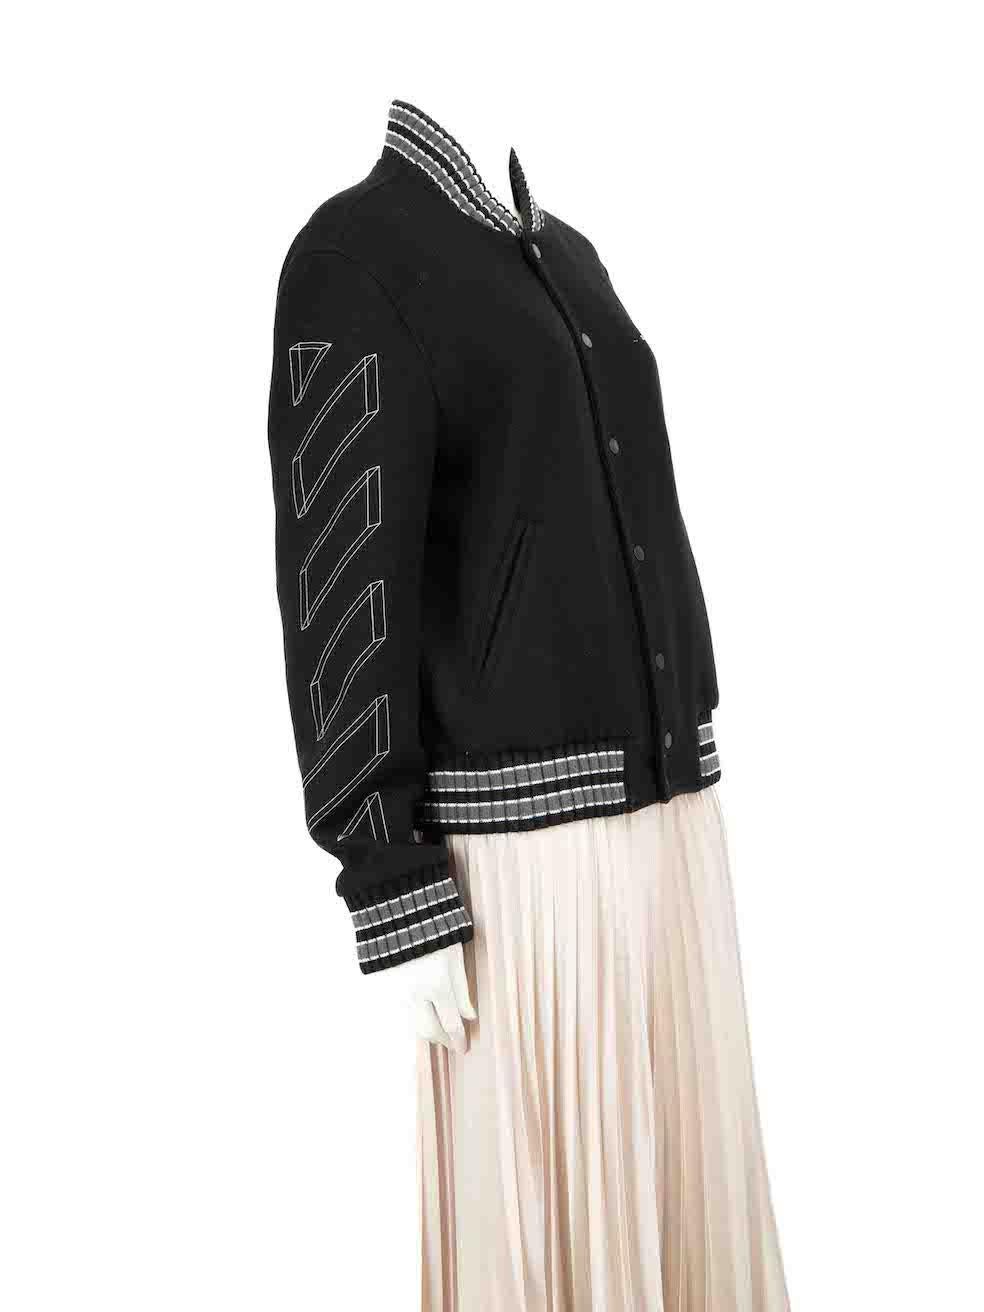 CONDITION is Very good. Minimal wear to jacket is evident. Minimal wear to the lining cuffs and hem with light pilling. There is also a pluck to the weave at the front on this used Off-White designer resale item.
 
 
 
 Details
 
 
 A/W18
 
 Black
